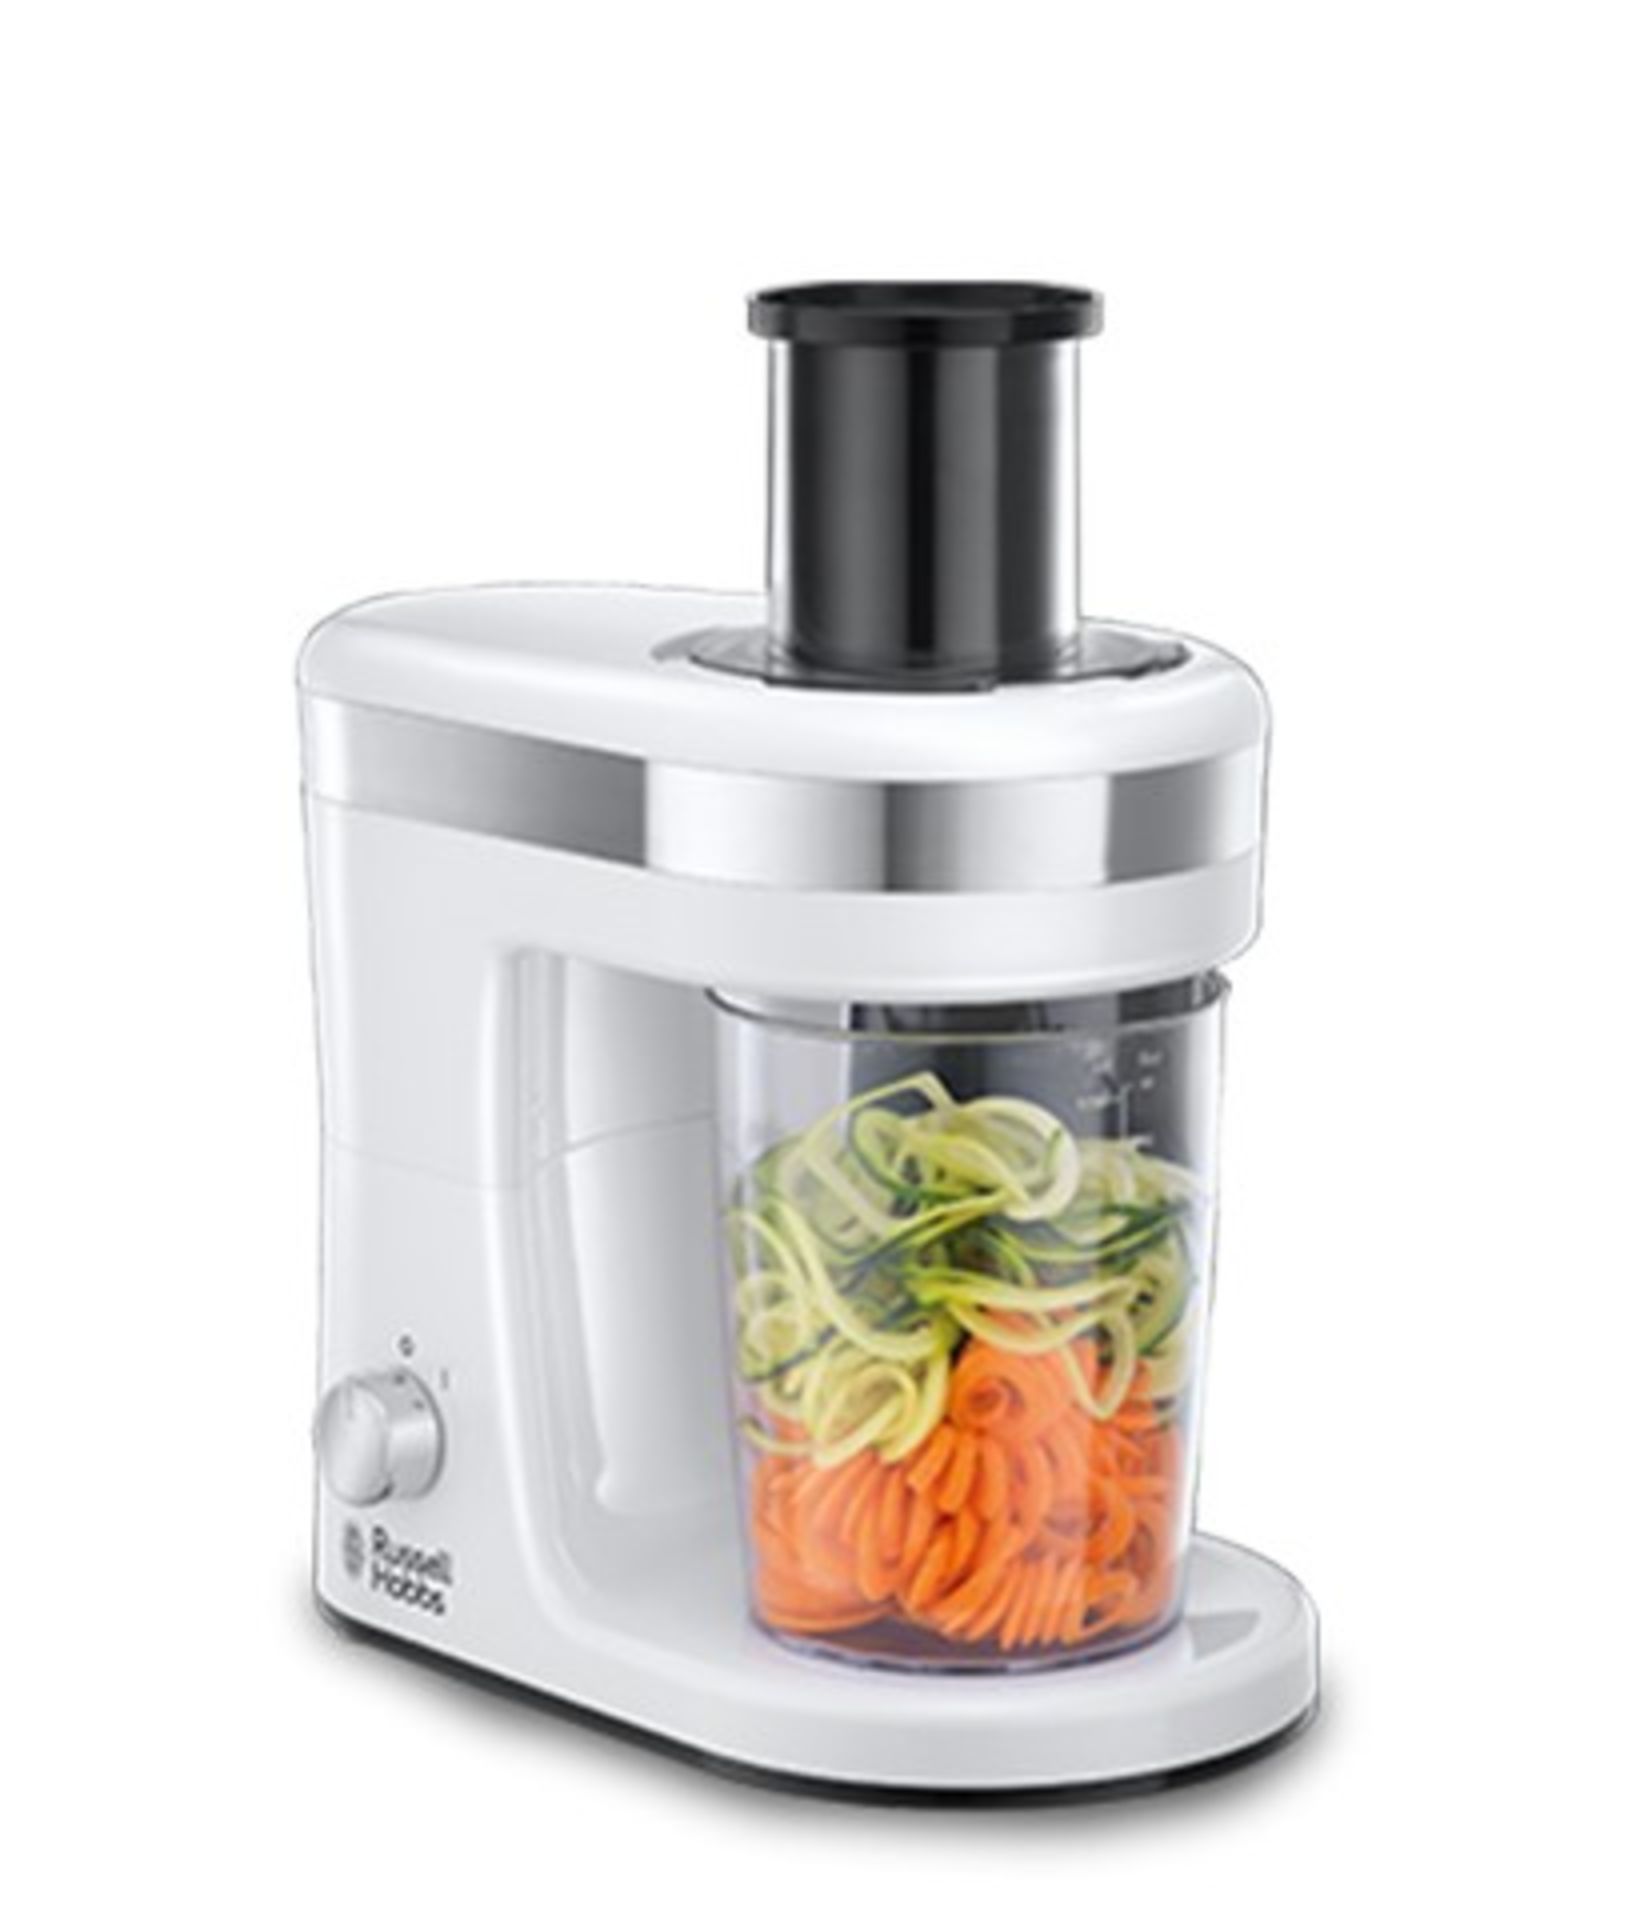 + VAT Brand New Russell Hobbs 300W Ultimate Spiralizer - Cuts into small noodles - large noodles -